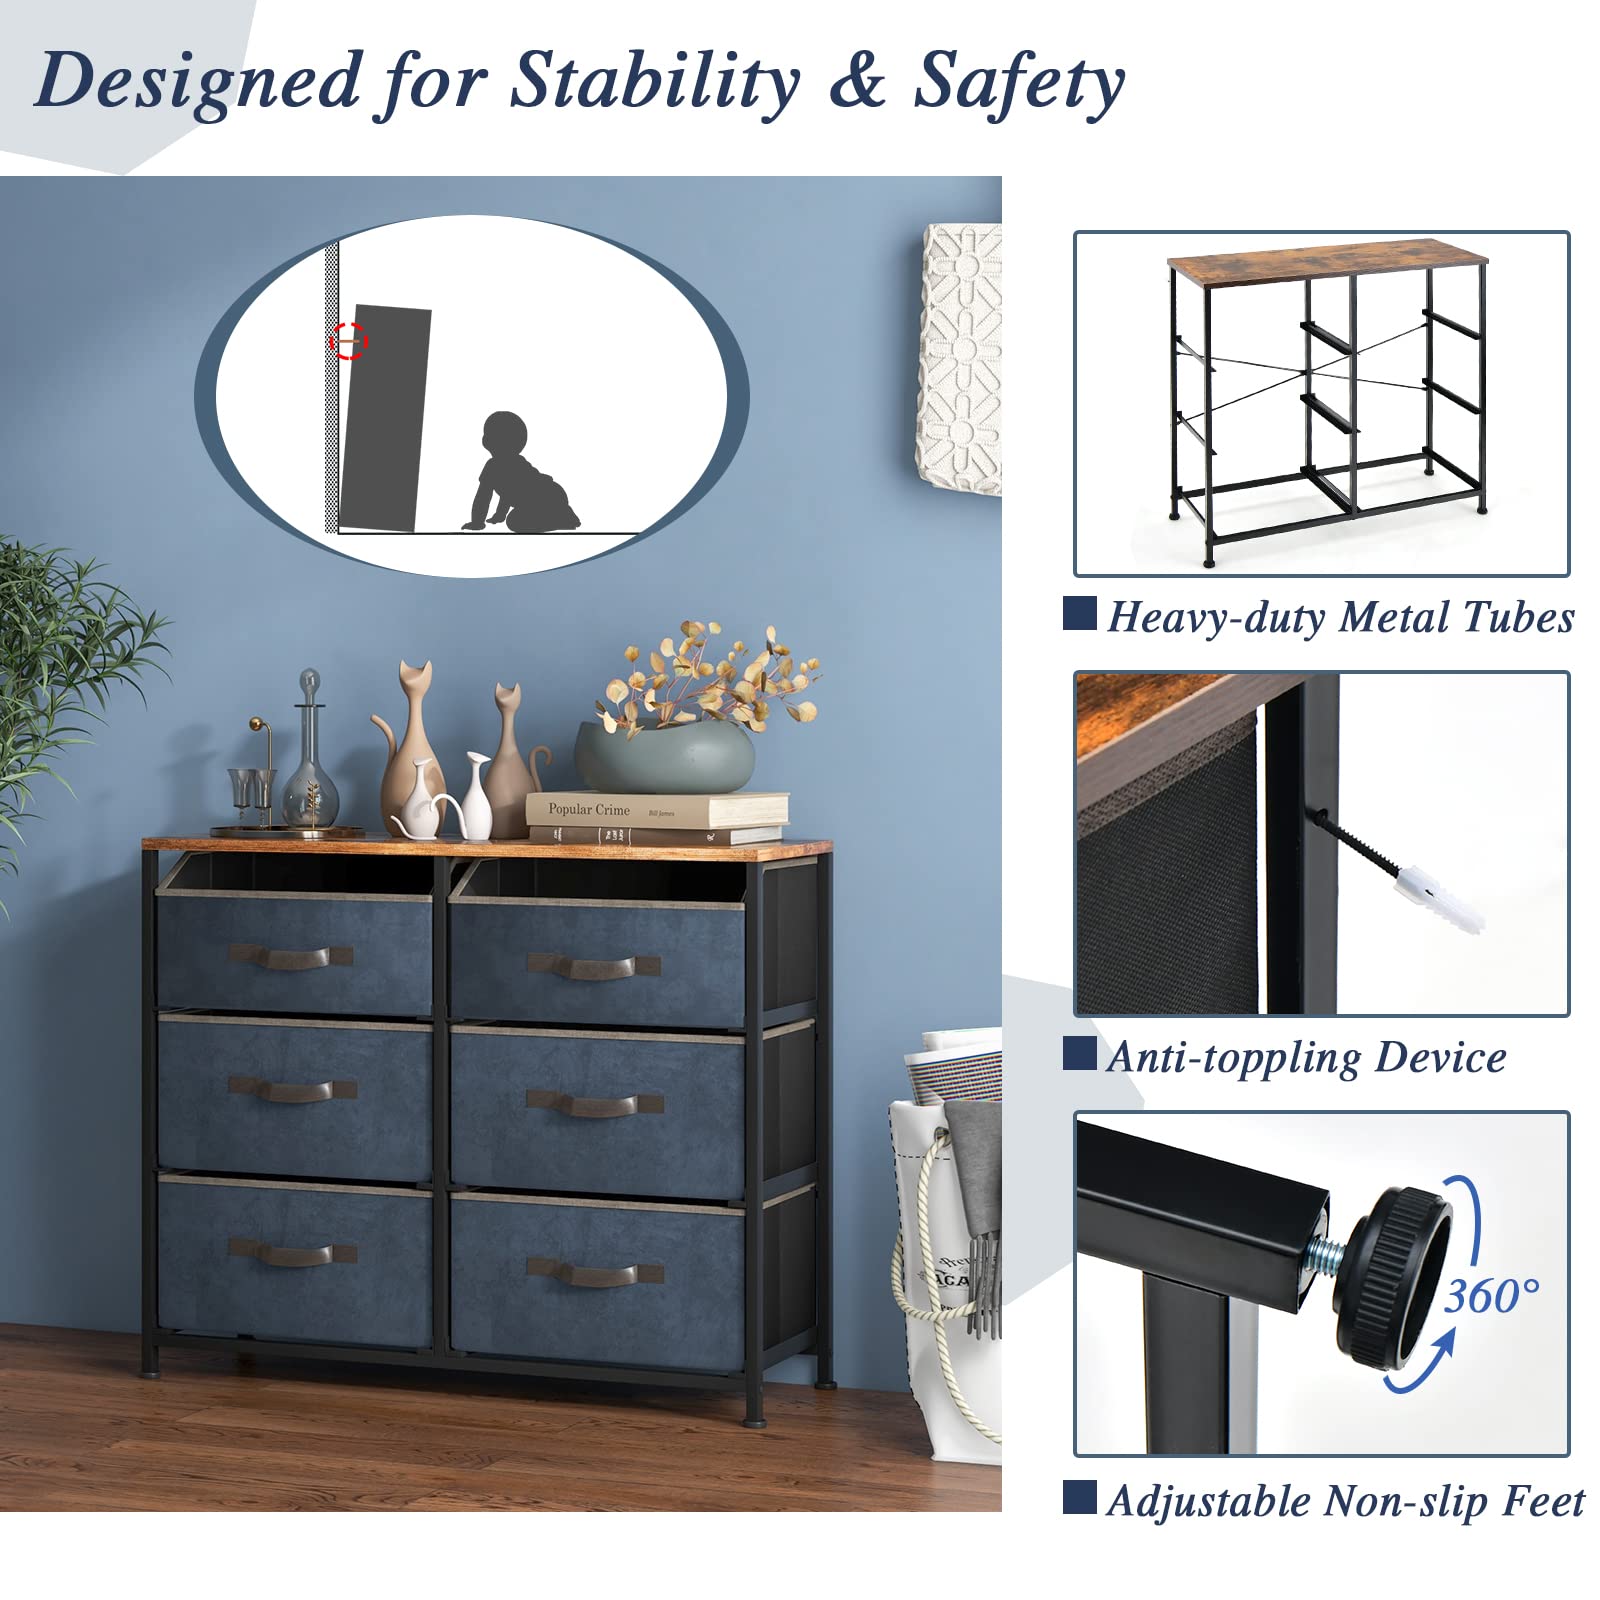 Giantex Chest of Drawers Dresser for Bedroom - Storage Tower with Metal Frame, Anti-toppling Devices